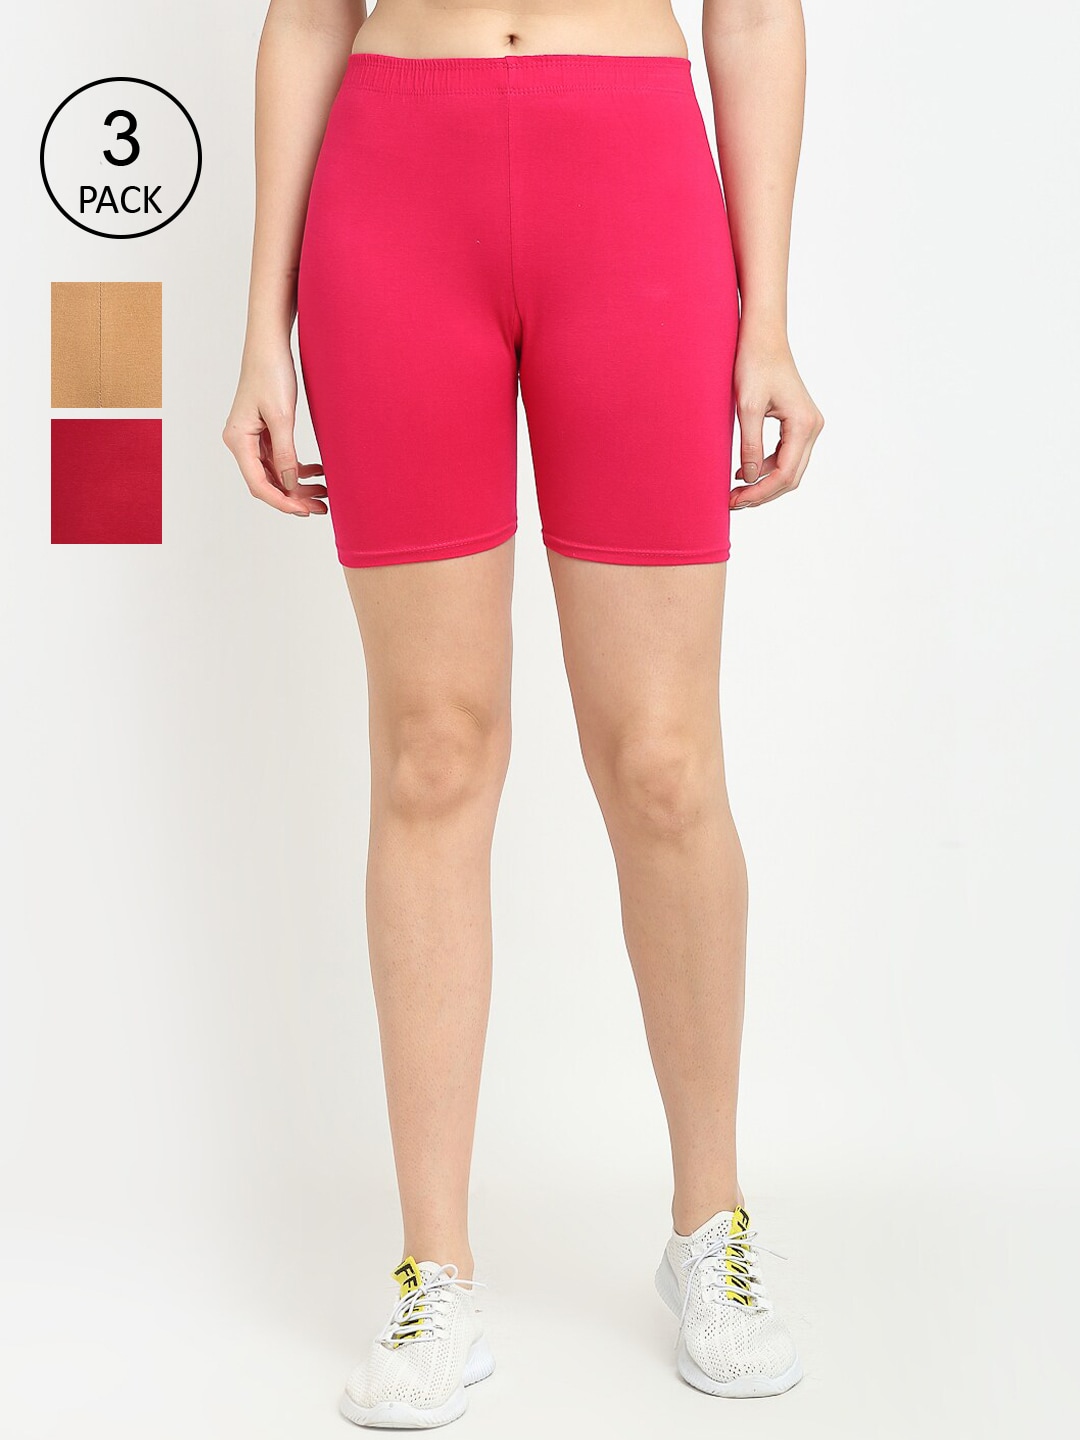 GRACIT Women Pink Cycling Sports Shorts Price in India